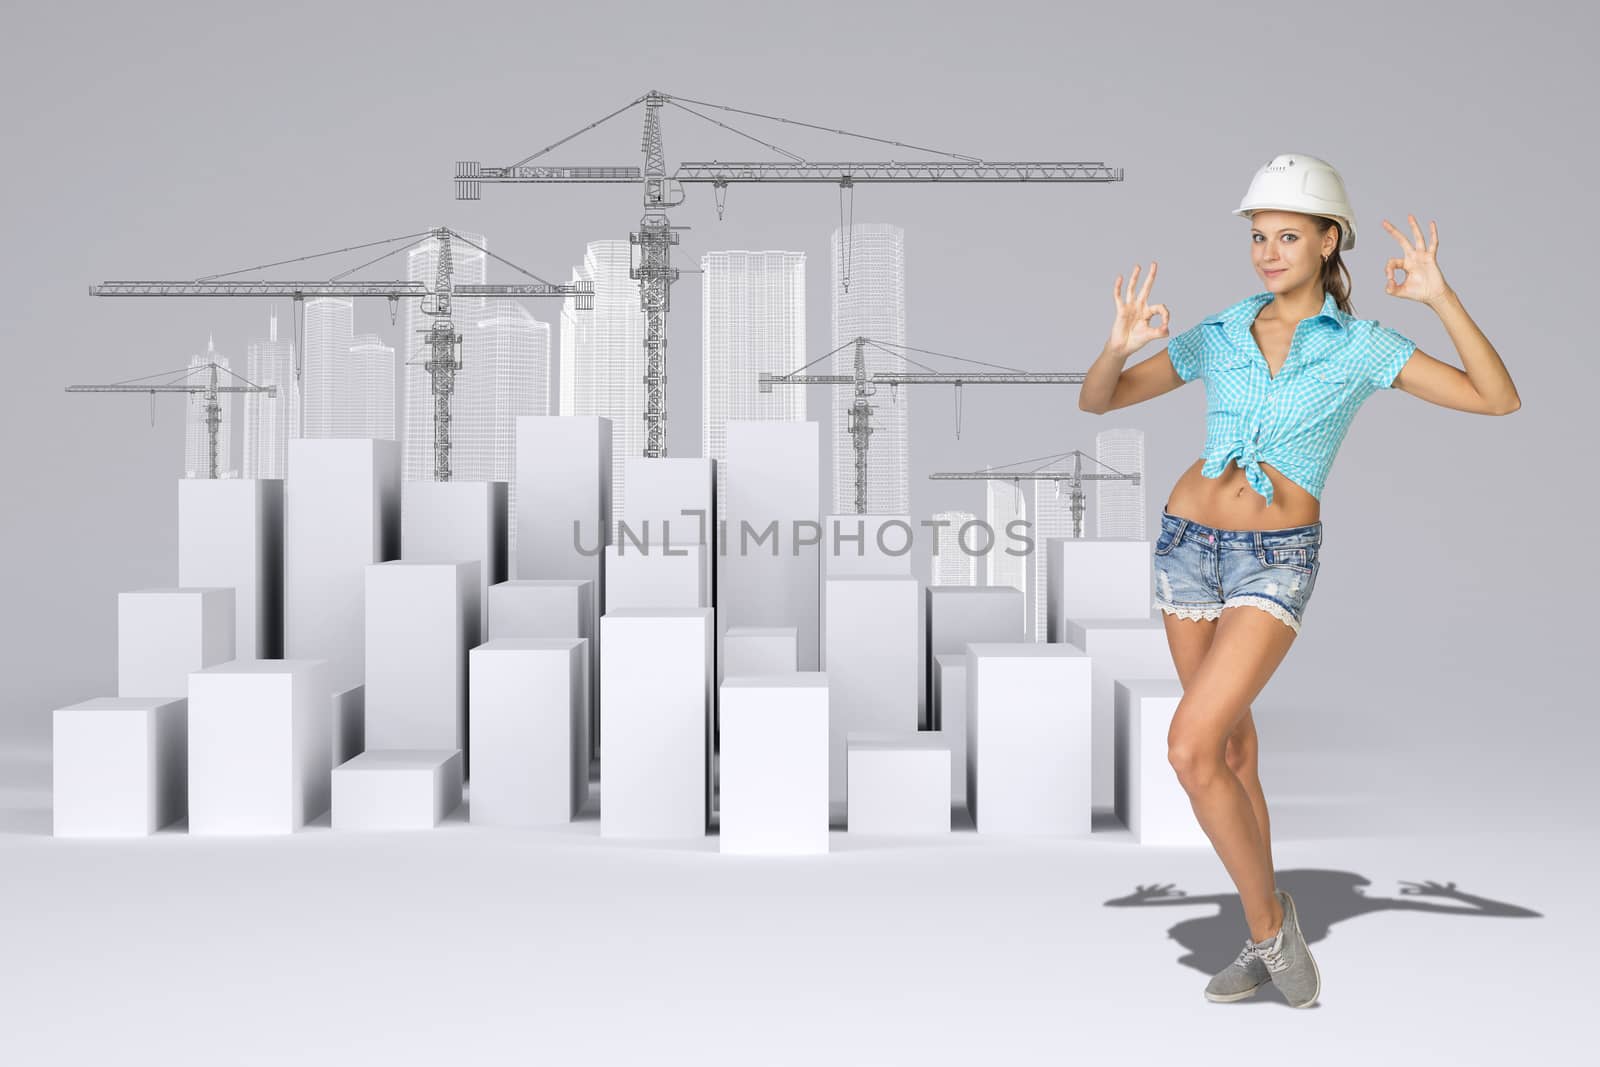 Beautiful girl in working clothes showing hand signs, looking at camera, smiling. Minimalistic city of white cubes with wire-frame buildings and tower cranes on gray background